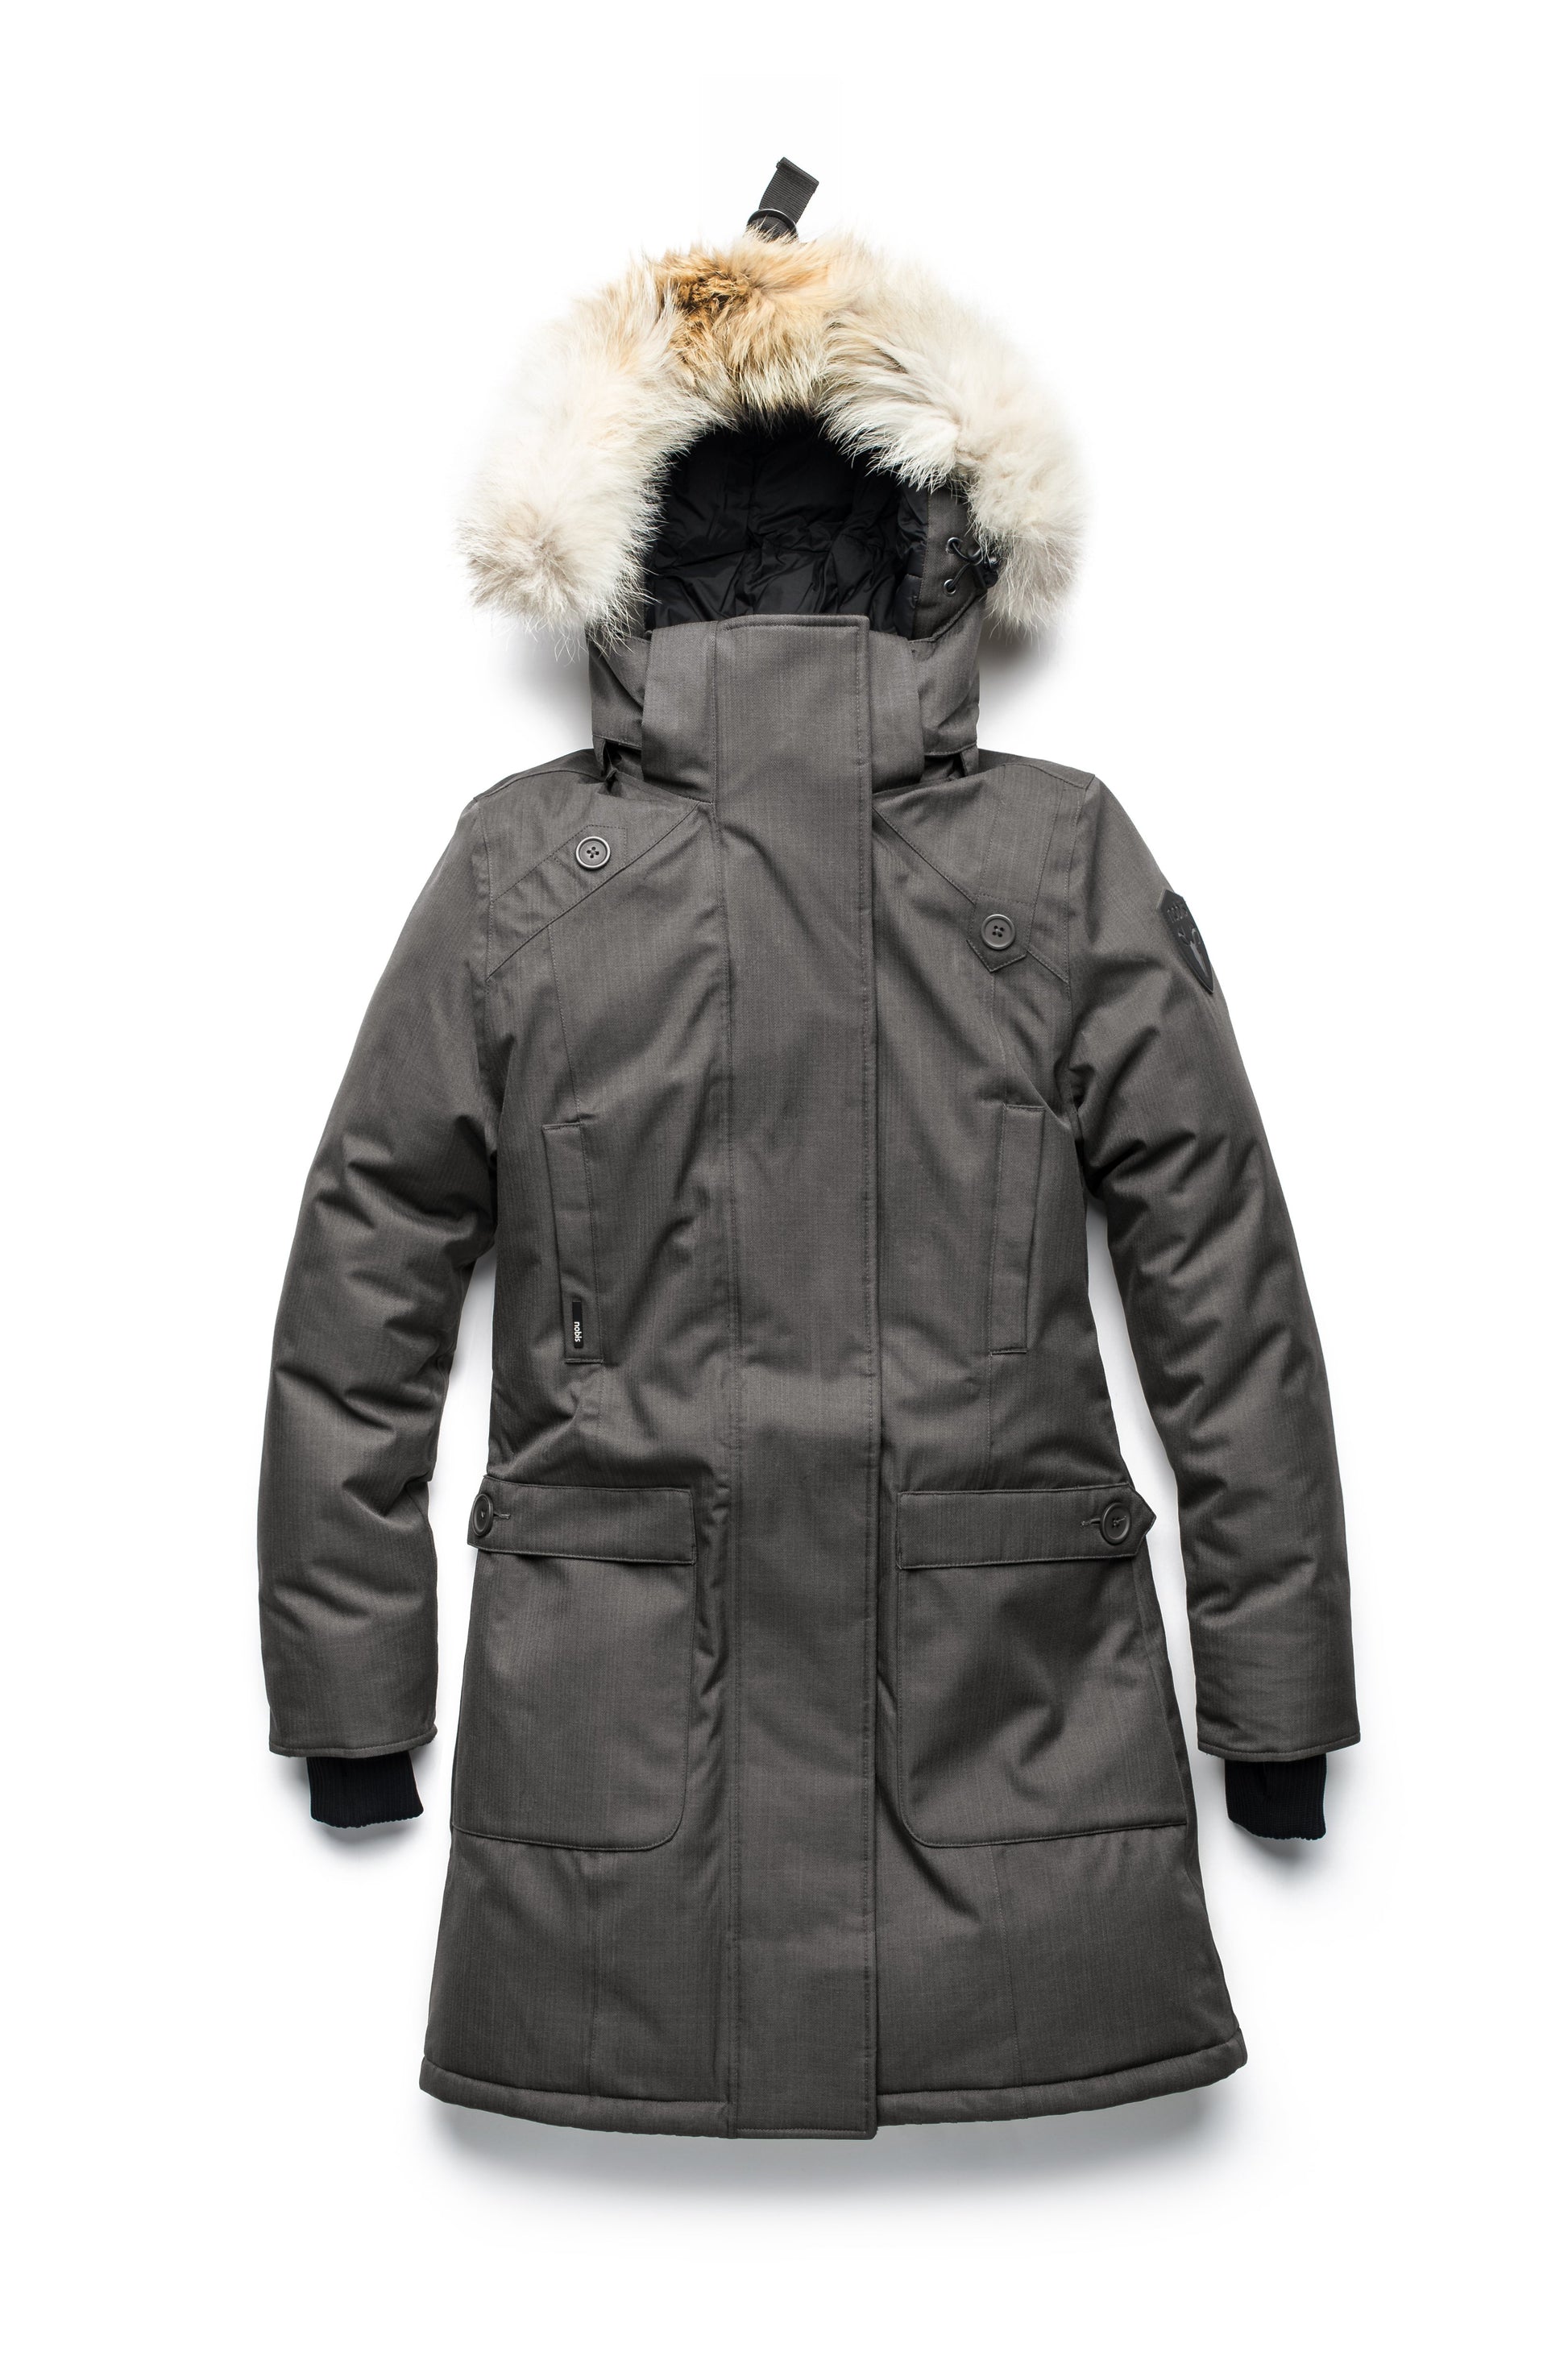 Best selling women's down filled knee length parka with removable down filled hood in CH Steel Grey